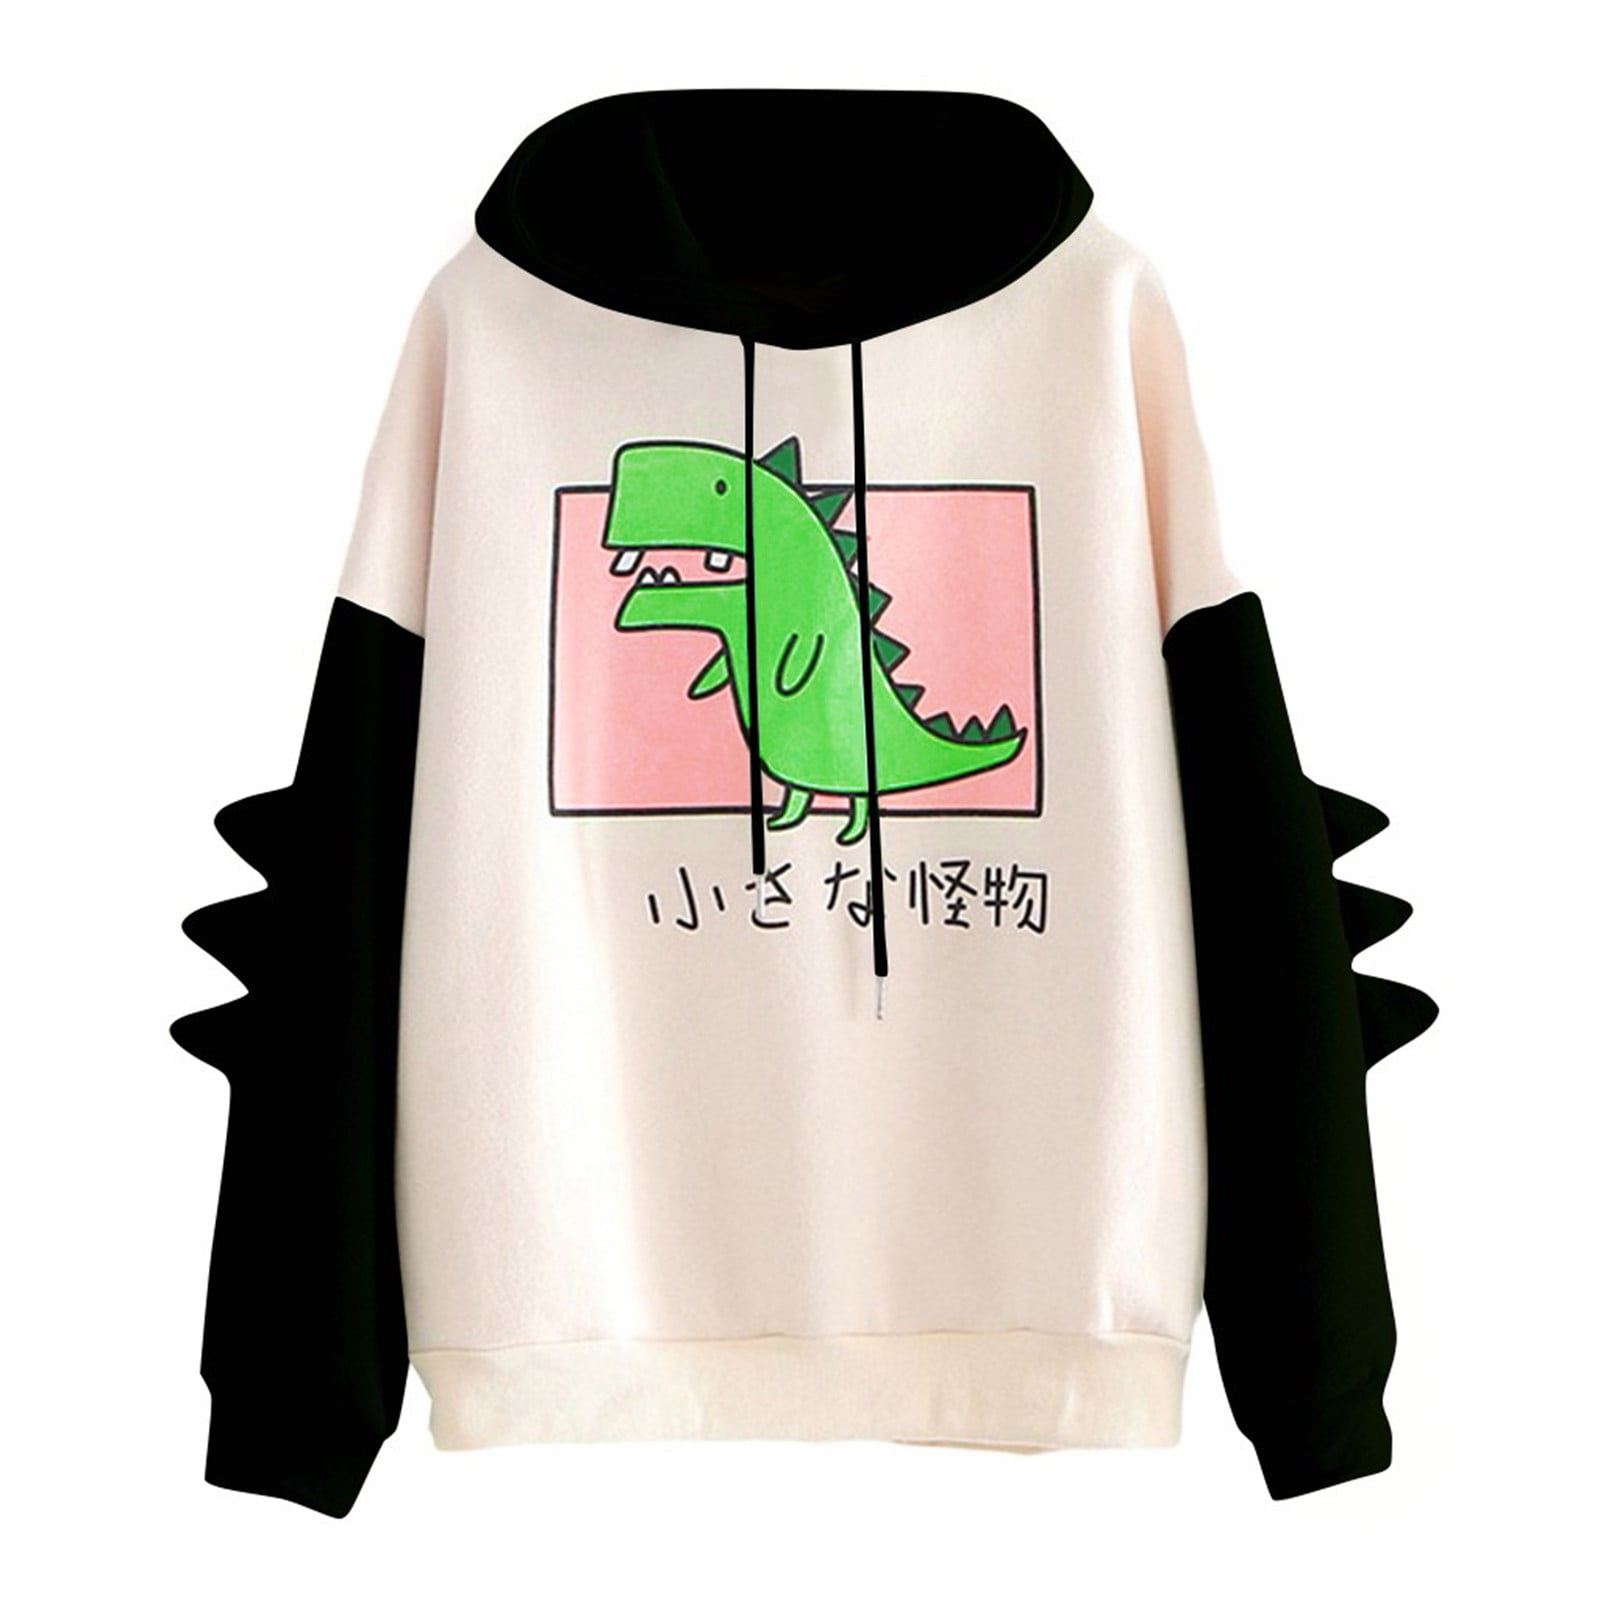 Womens Hoodies Women Girls Fashion Letter Printed Long Sleeve Hoodie and Sweatshirt Loose Graphic Pullover Tops